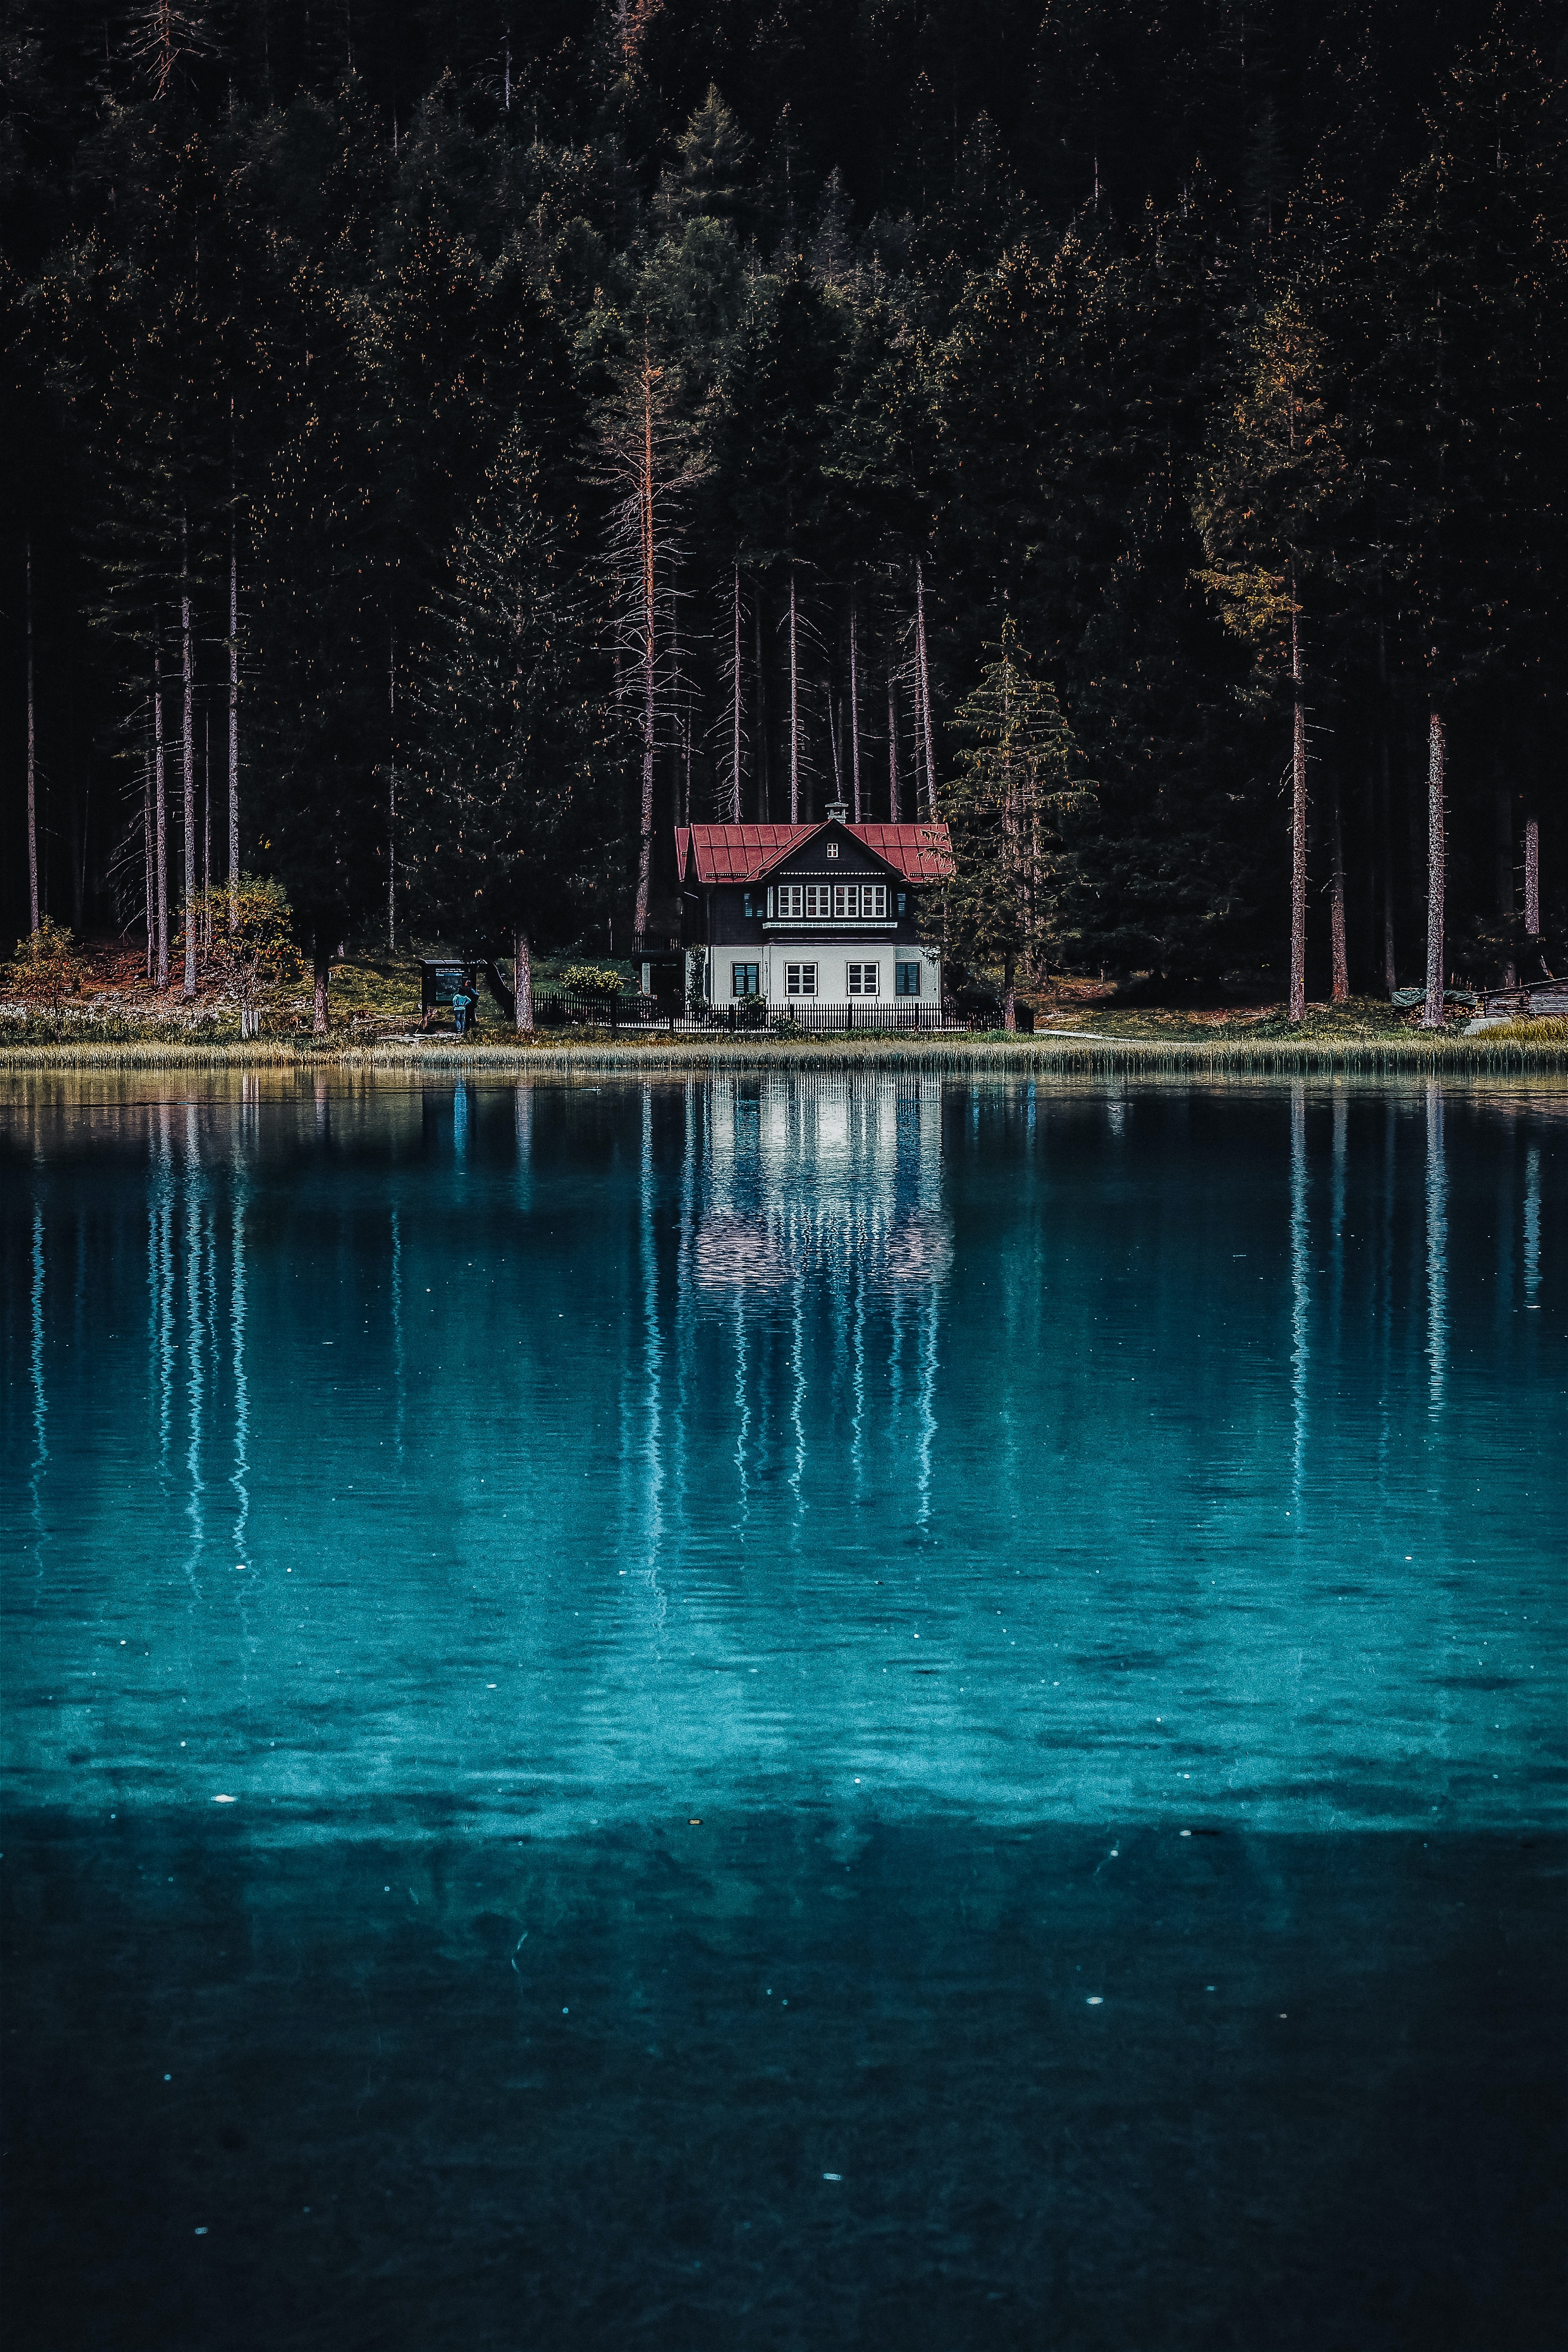 HD wallpaper, Dark Forest, Landscape, 5K, Scenery, House, Lake, Tall Trees, Reflection, Body Of Water, Woods